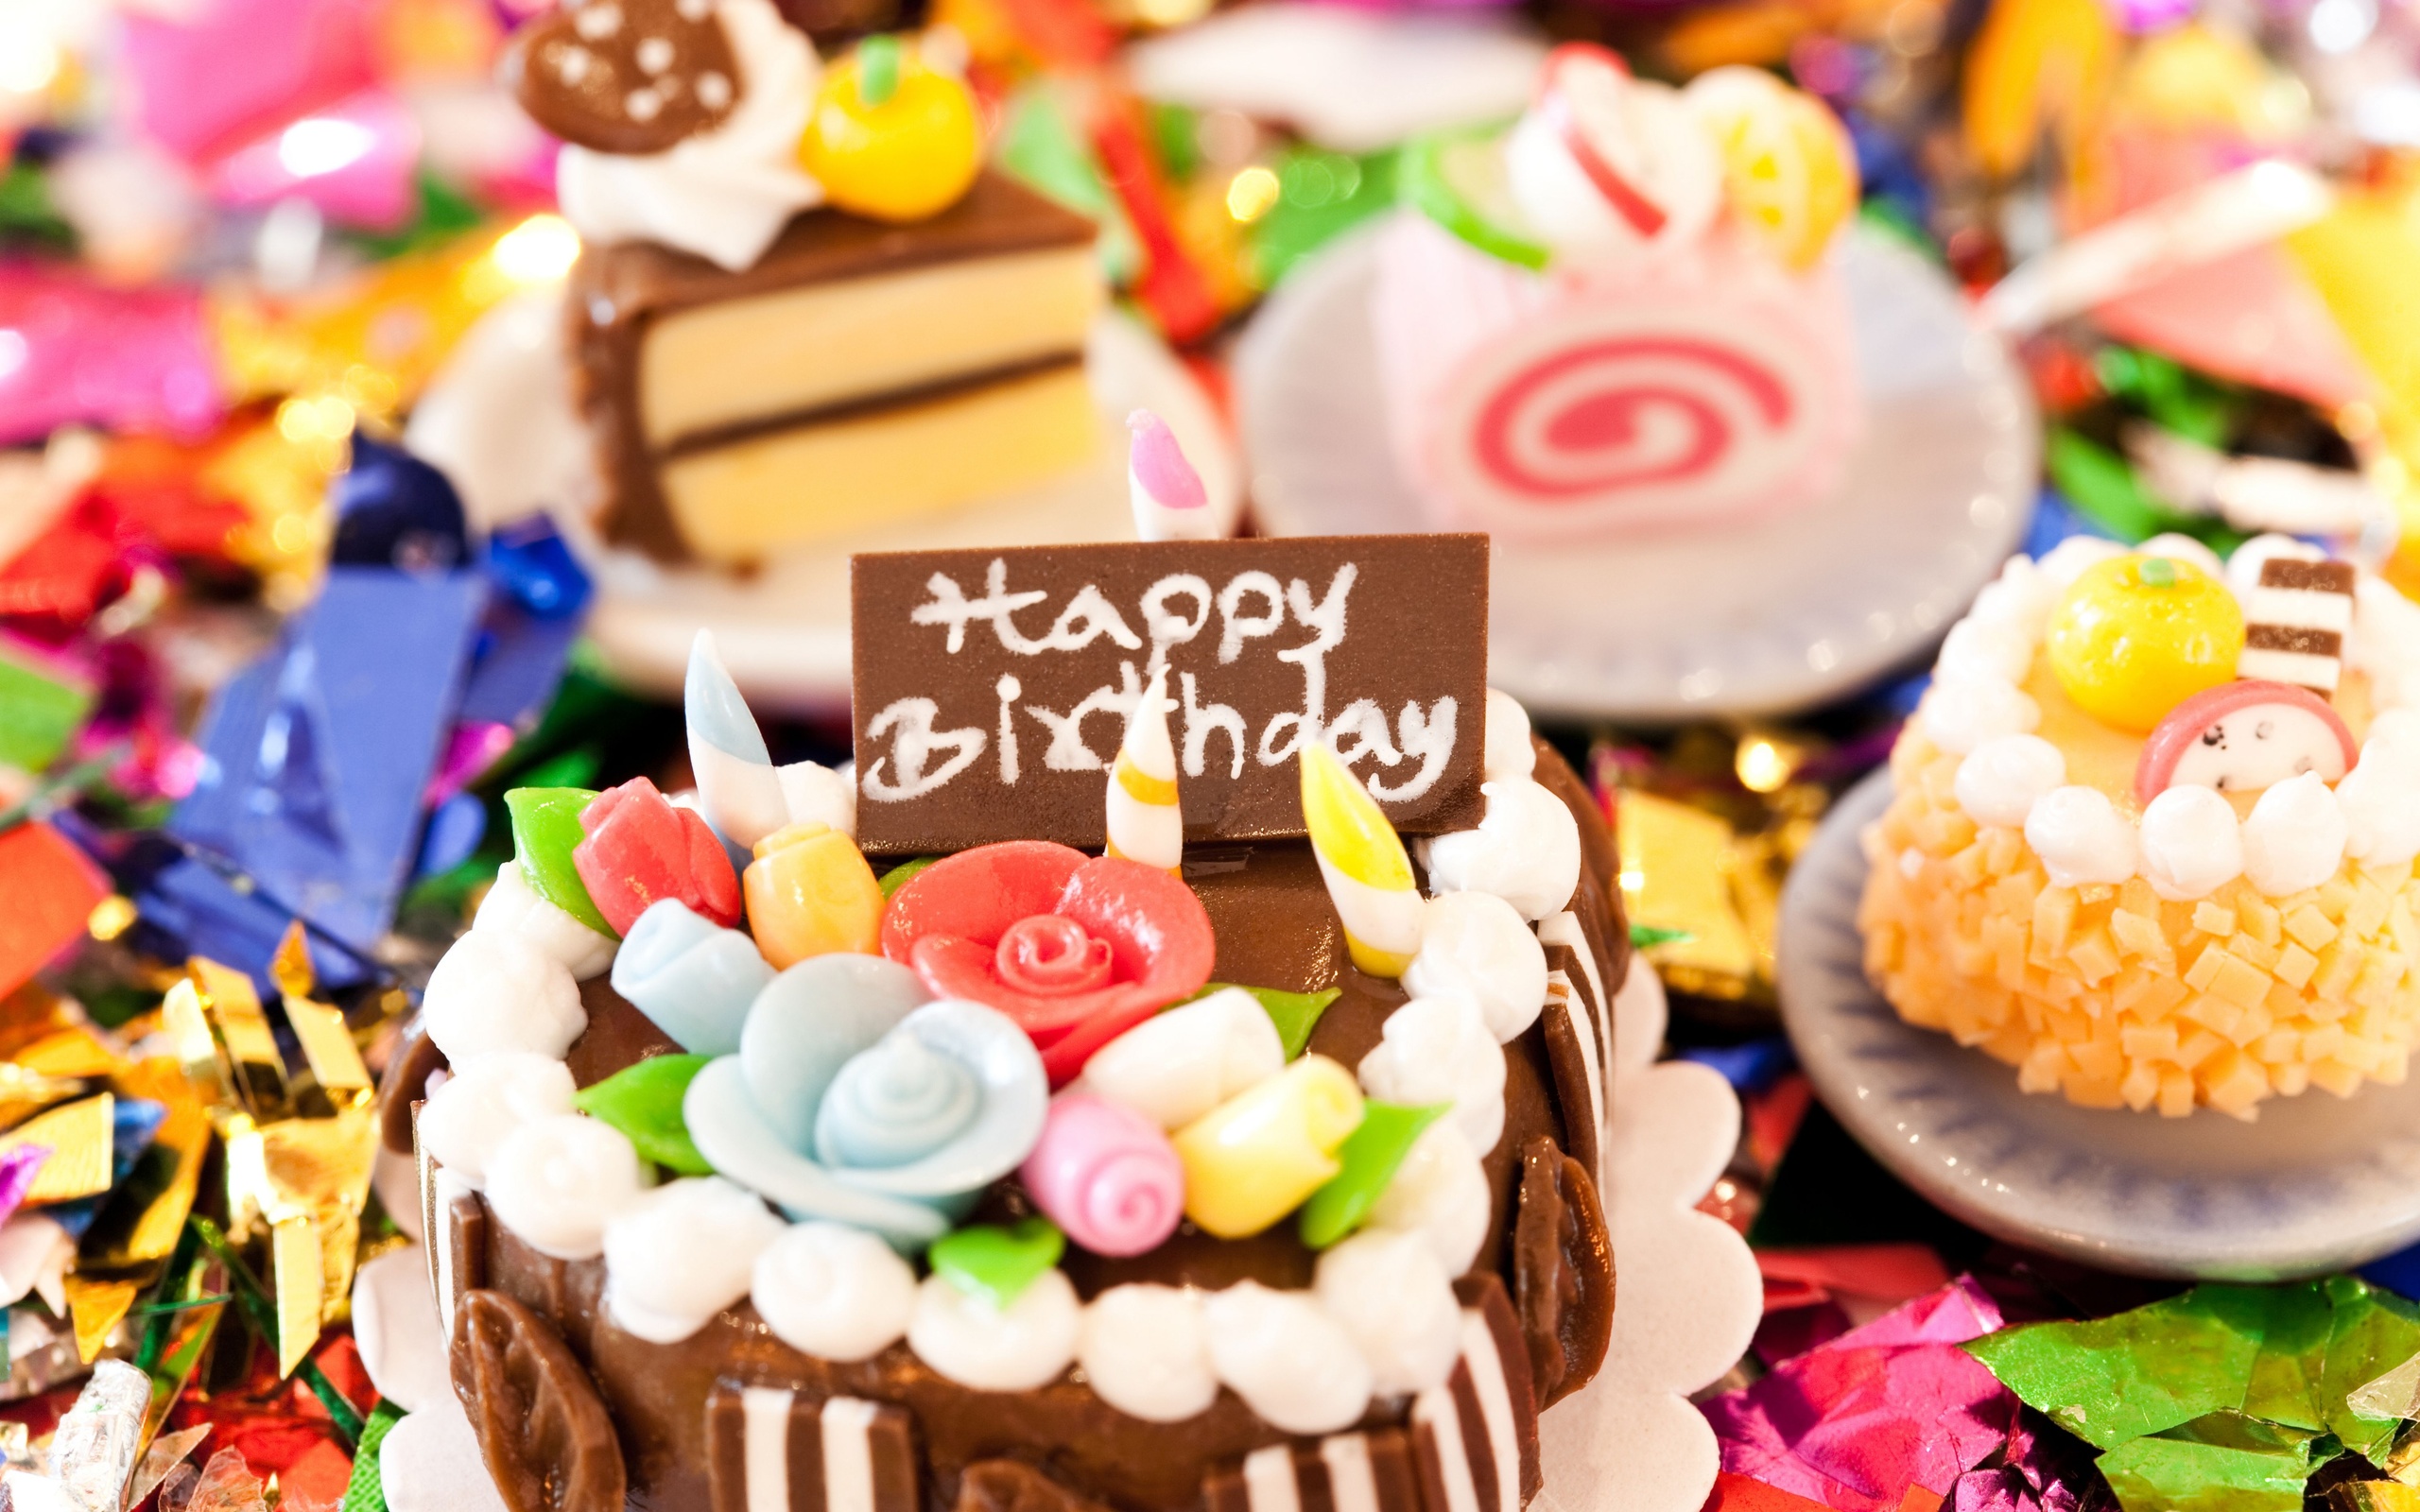 wallpapers happy birthday, holiday, birthday, colorful, dessert, sugar, sweets